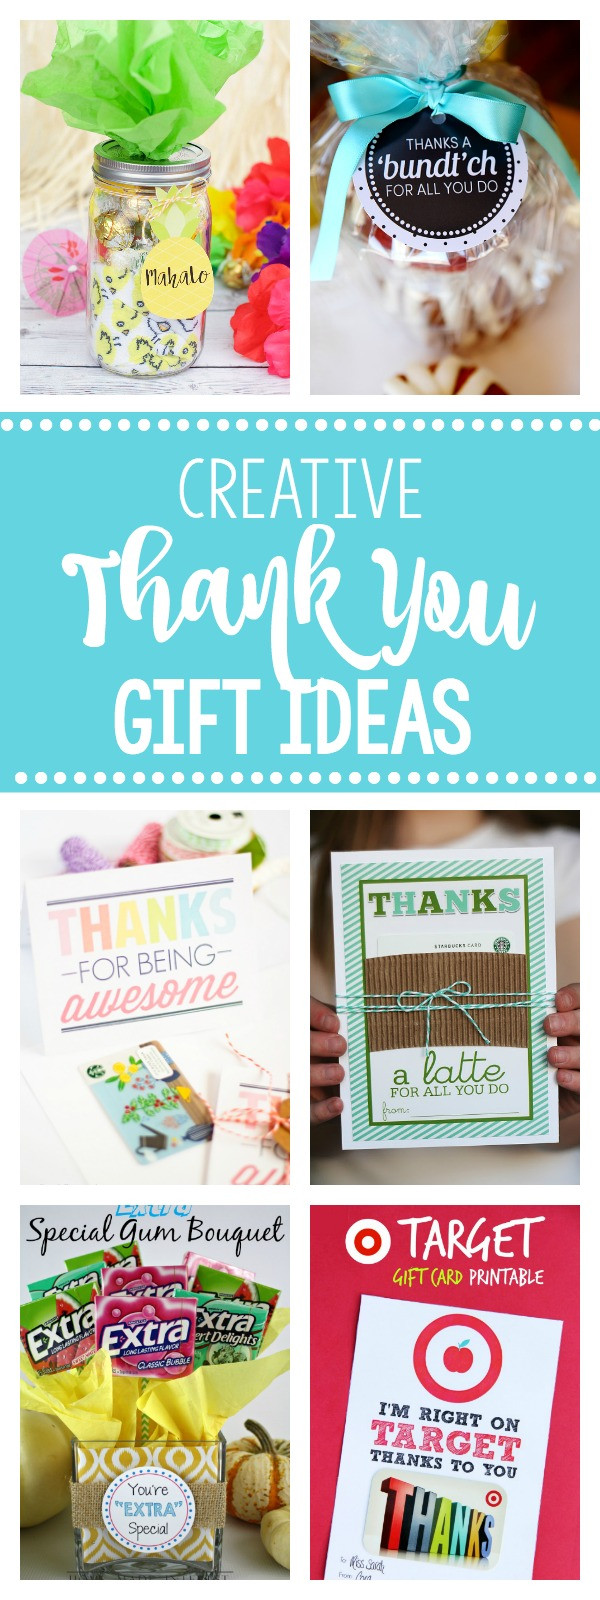 Thank You Gift Ideas
 25 Creative & Unique Thank You Gifts – Fun Squared